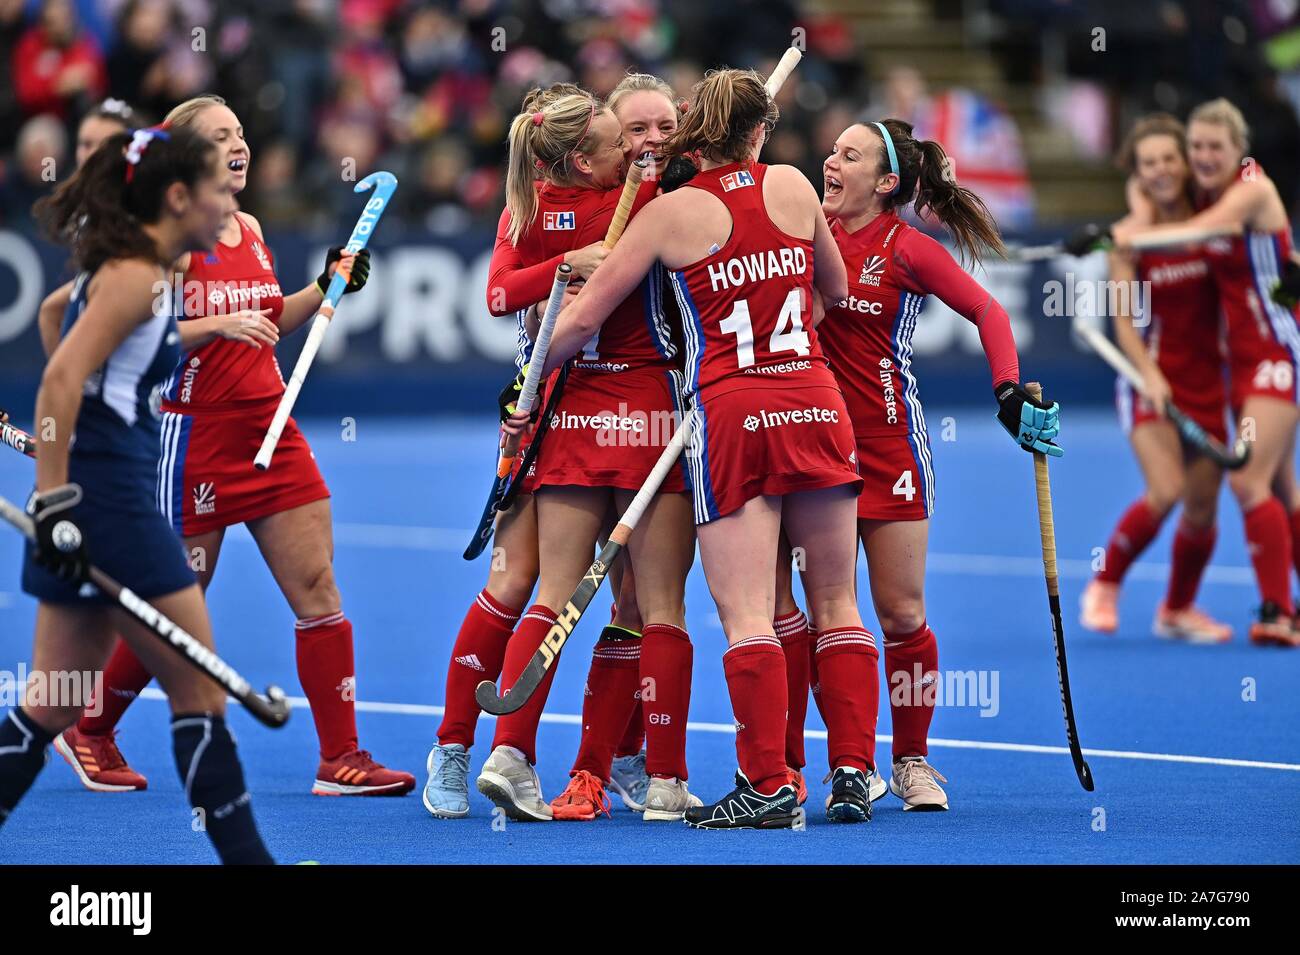 Stratford. United Kingdom. 02 November 2019. Goalscorer Izzy Petter (Great Britain, 33) is congratulated by Hannah Martin (Great Britain) and Tess Howard (Great Britain, 14). Great Britain v Chile. FIH Womens Olympic hockey qualifier. Lee Valley hockey and tennis centre. Stratford. London. United Kingdom. Credit Garry Bowden/Sport in Pictures. Credit: Sport In Pictures/Alamy Live News Stock Photo